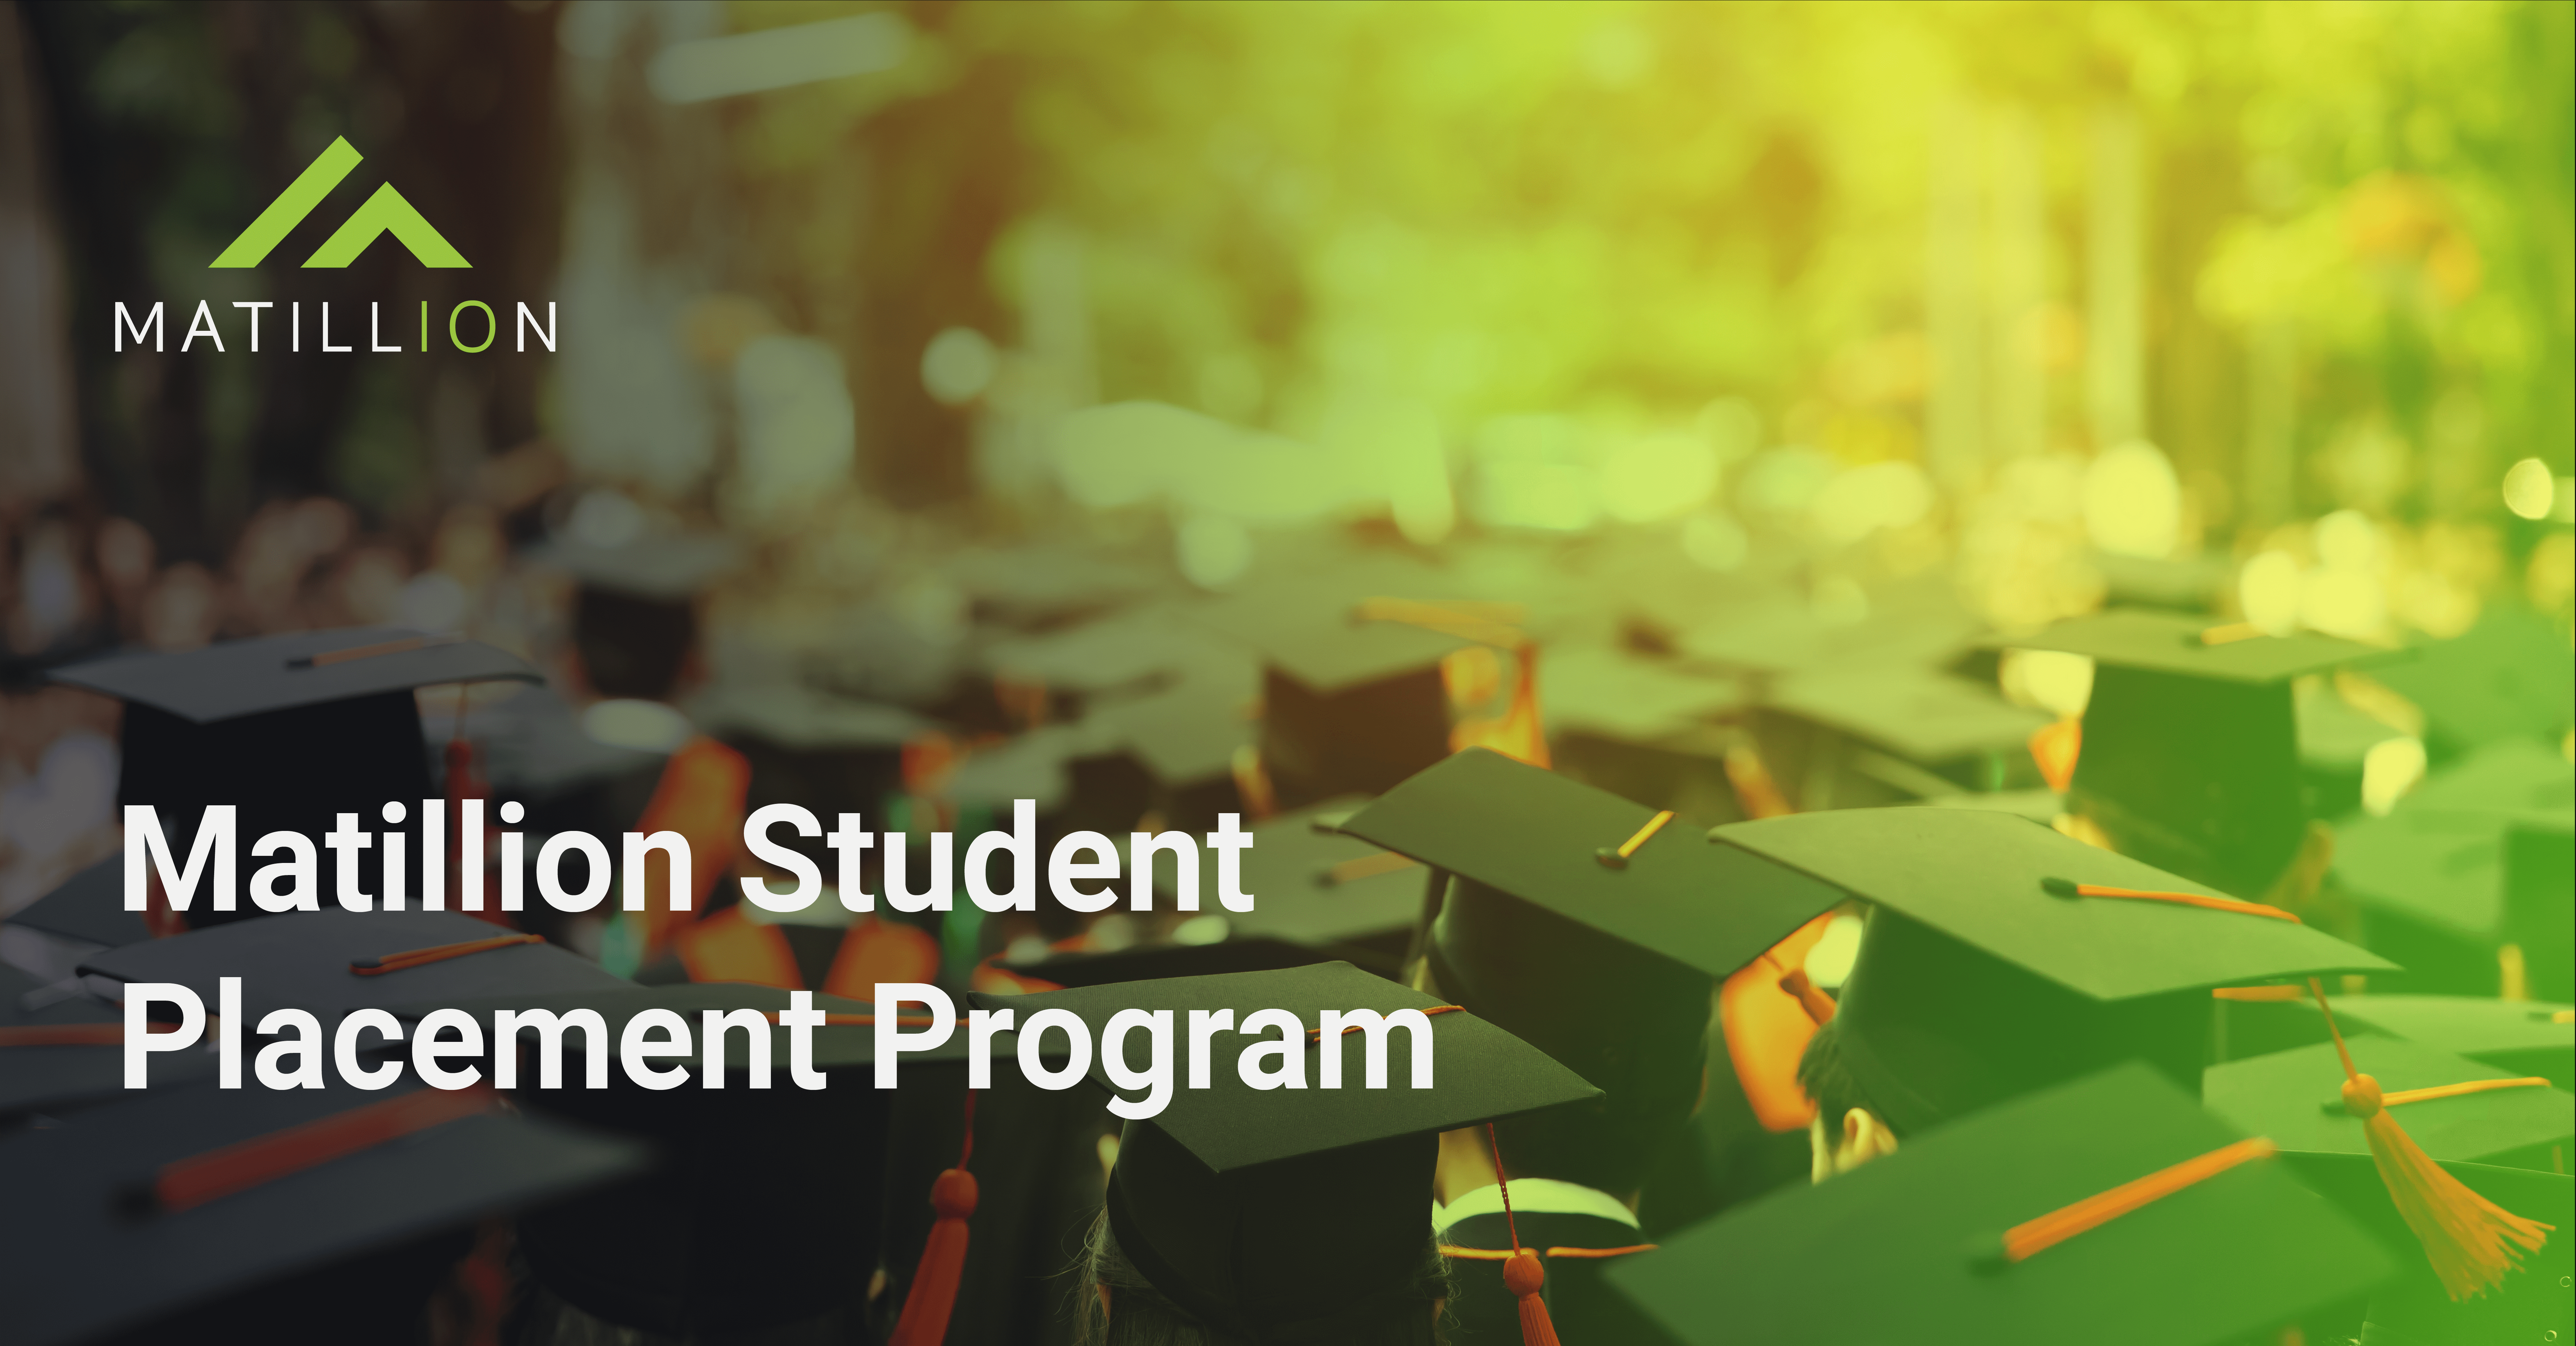 This is an image for the Matillion Student Placement Program. It shows several college graduates in cap and gown .